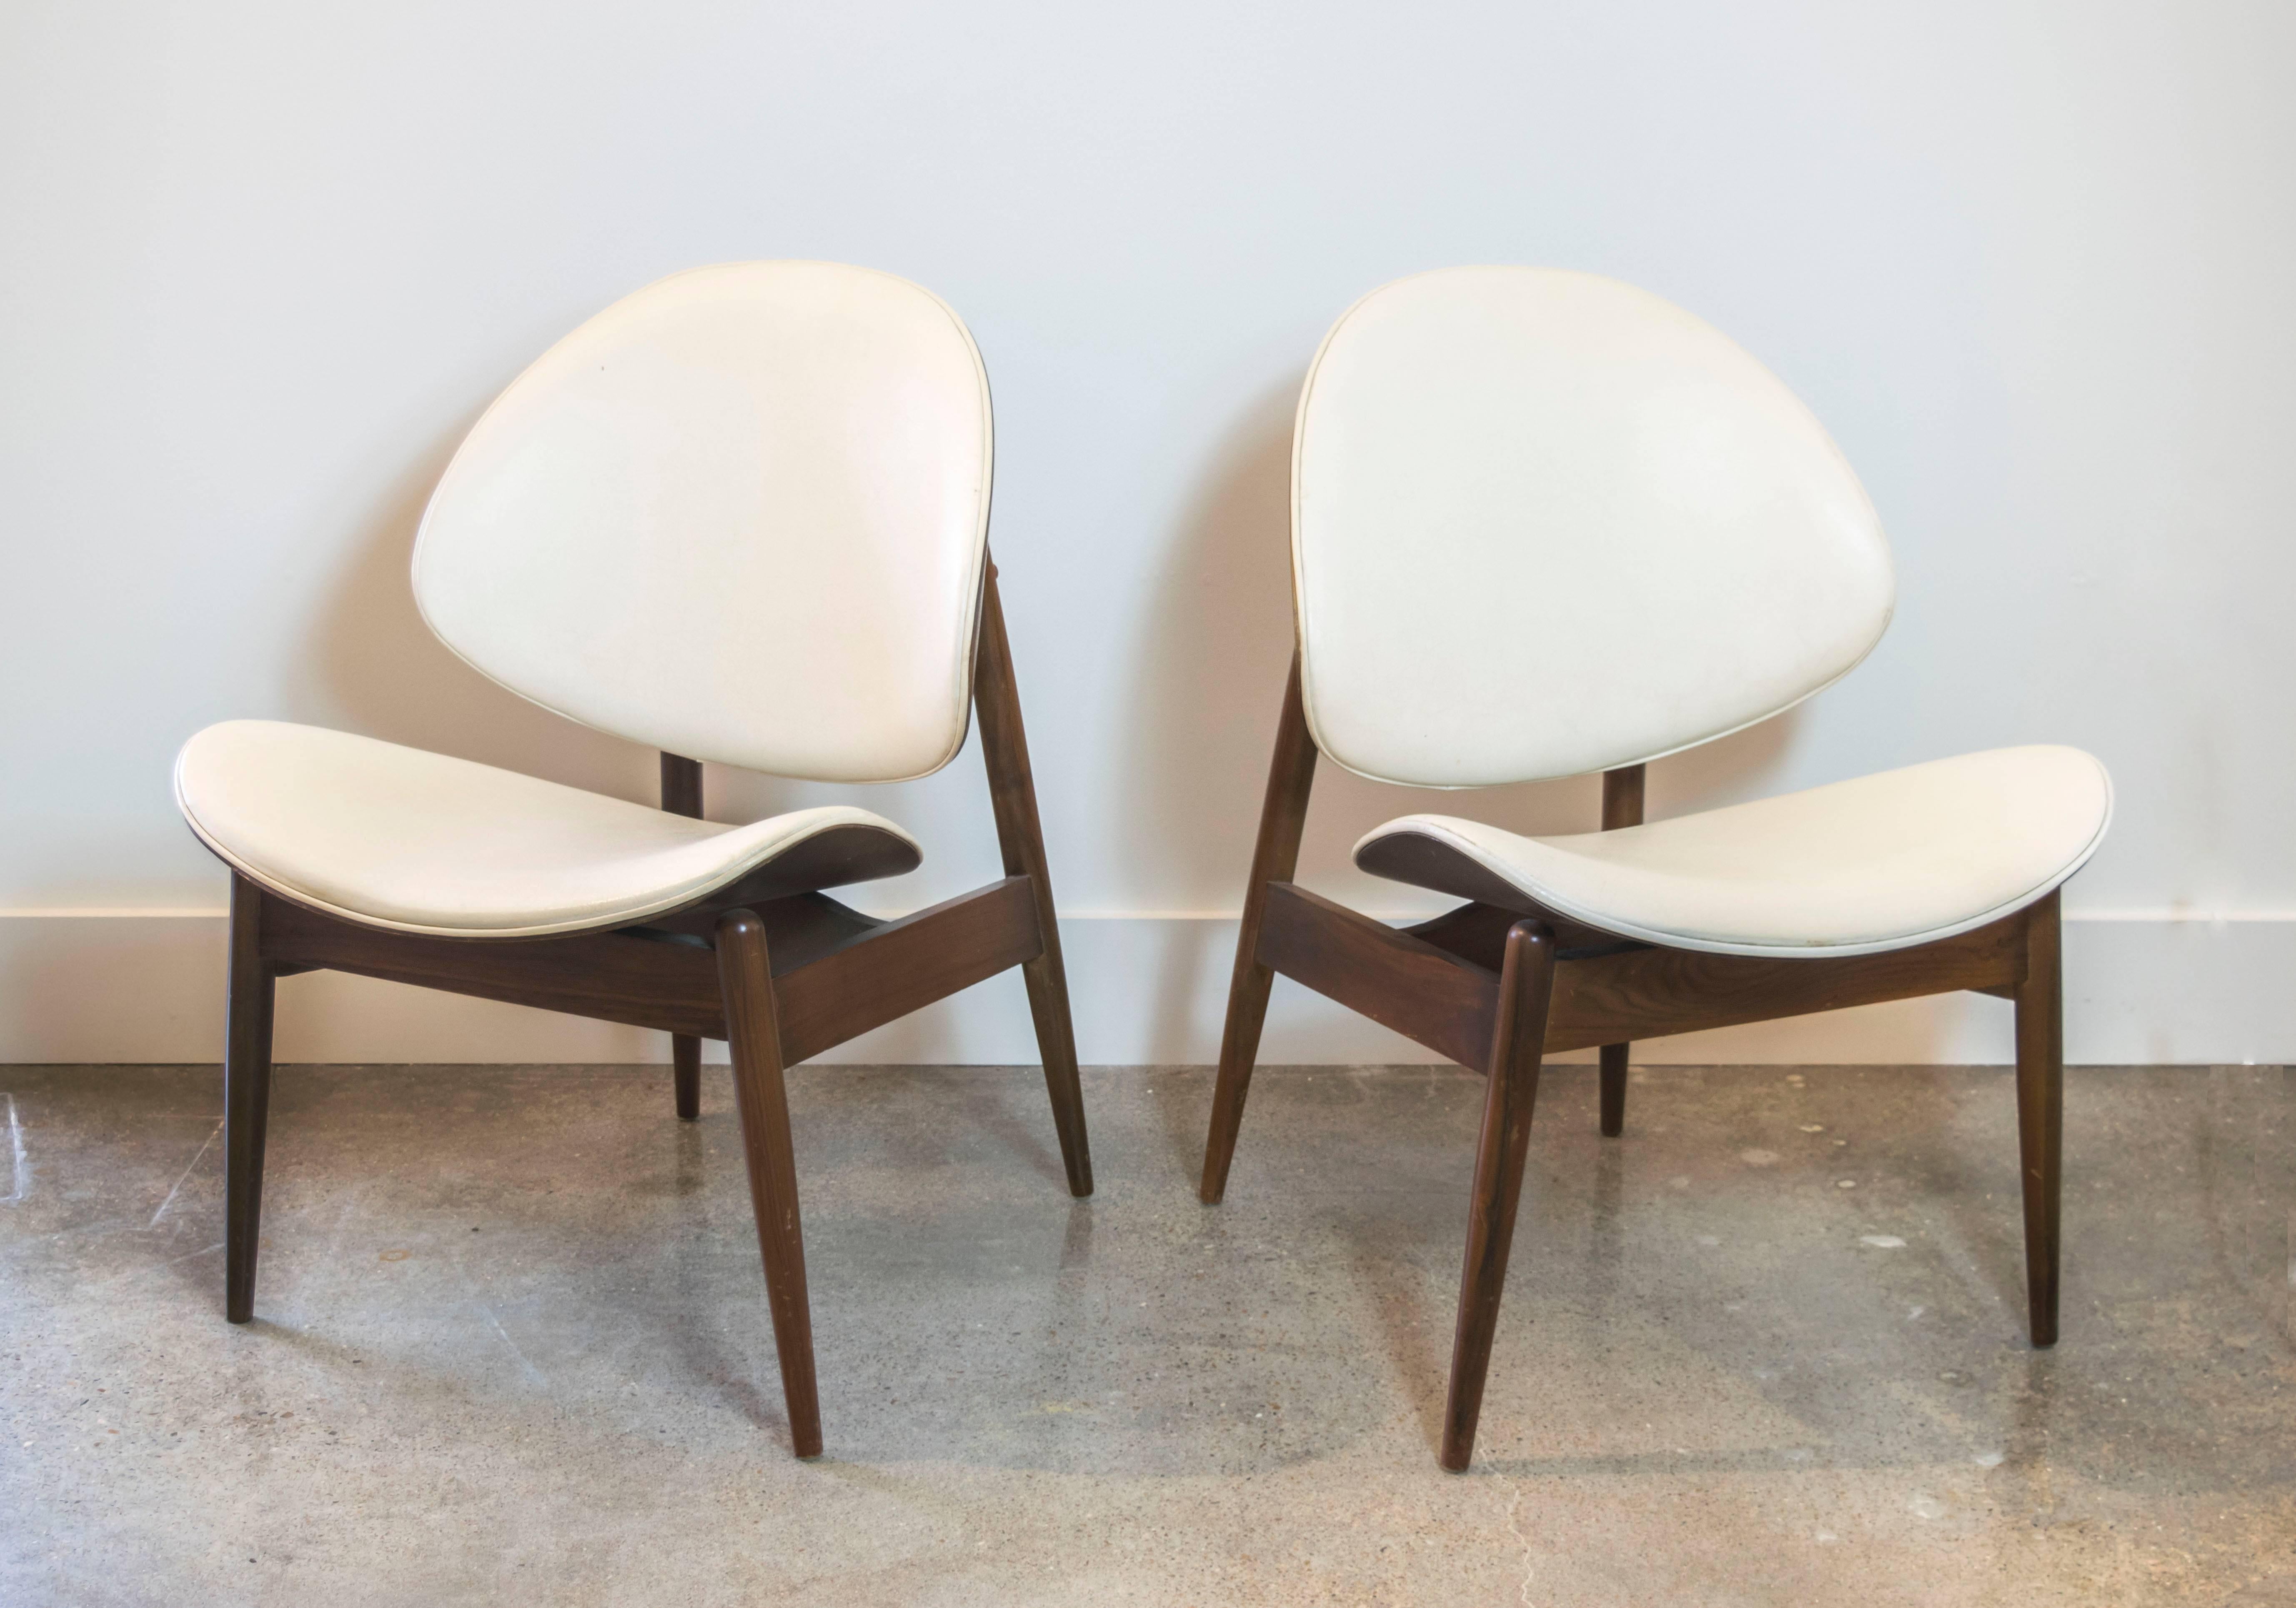 A pair of divine Mid Century classic chairs by Kodawood in the original cream vinyl. Use as is or recover. 